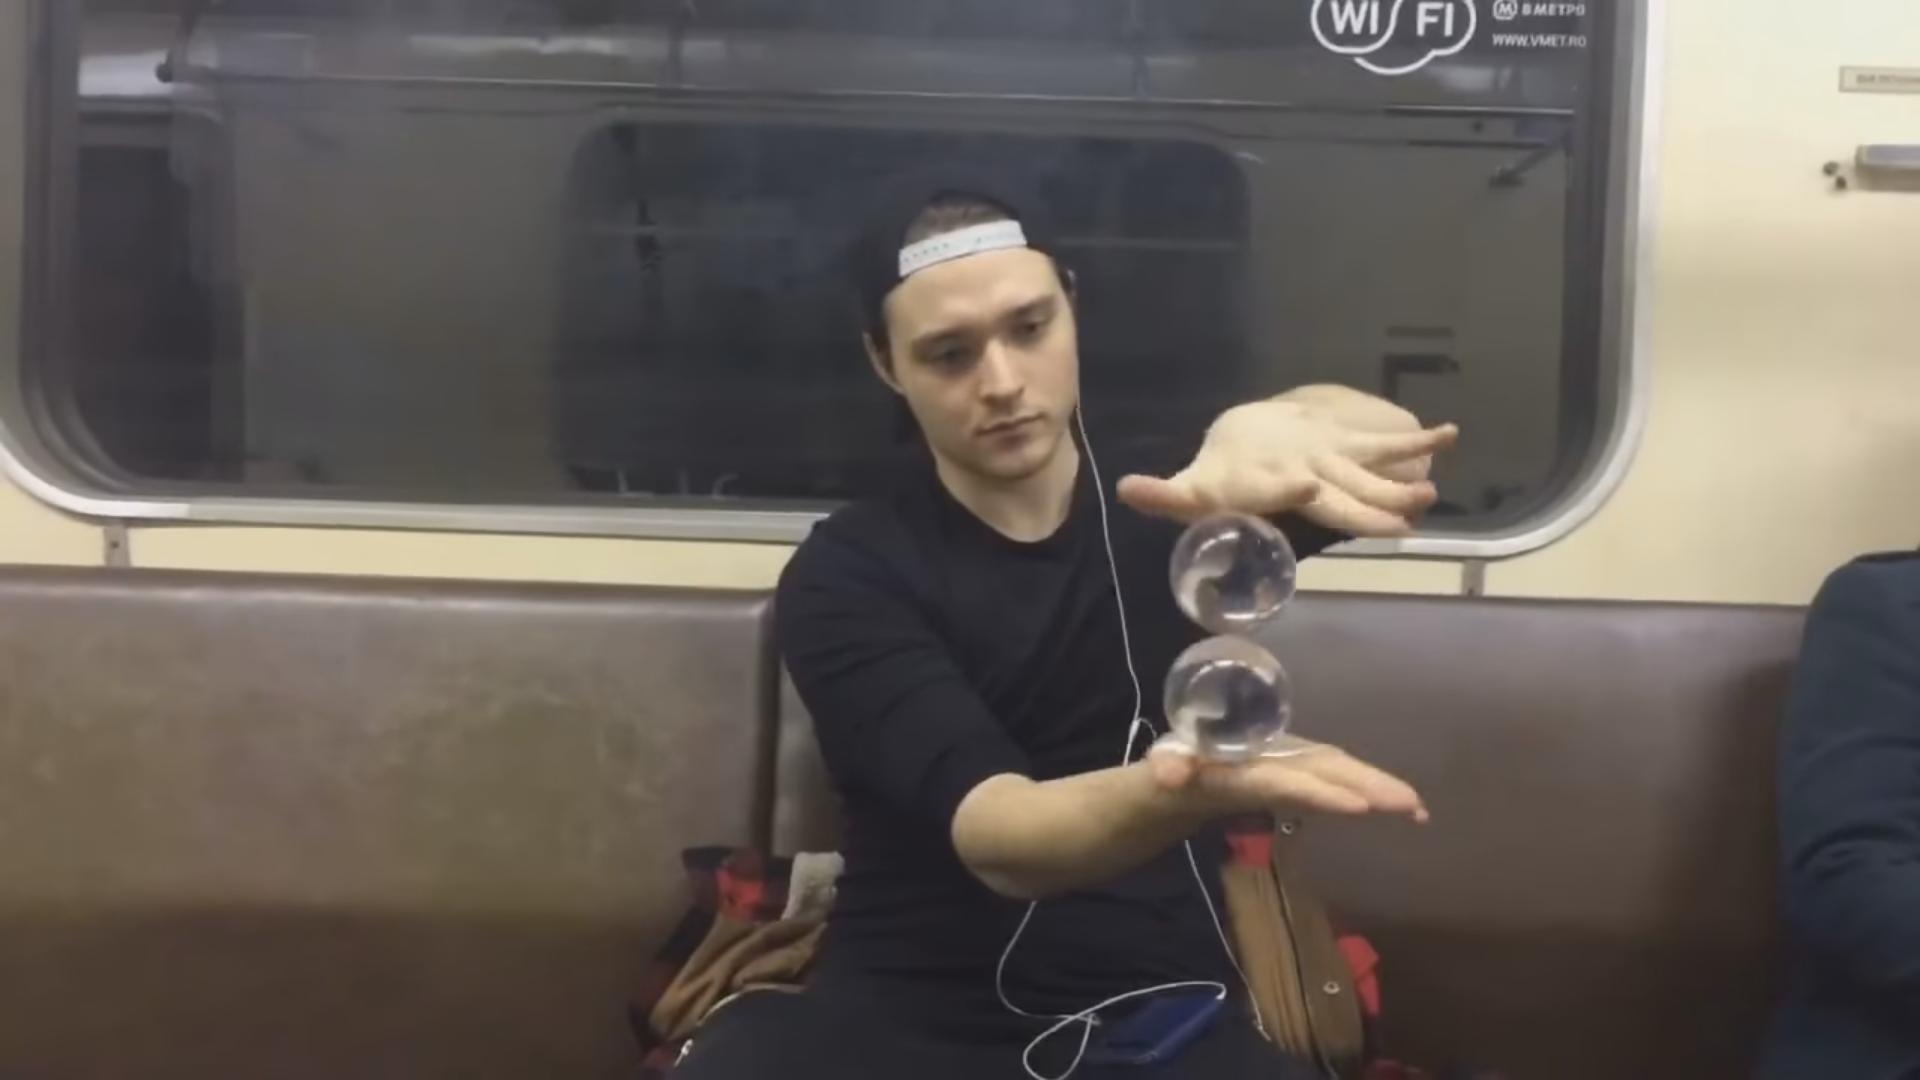 Look at What This Man Can Do With His Balls in a Moving Train